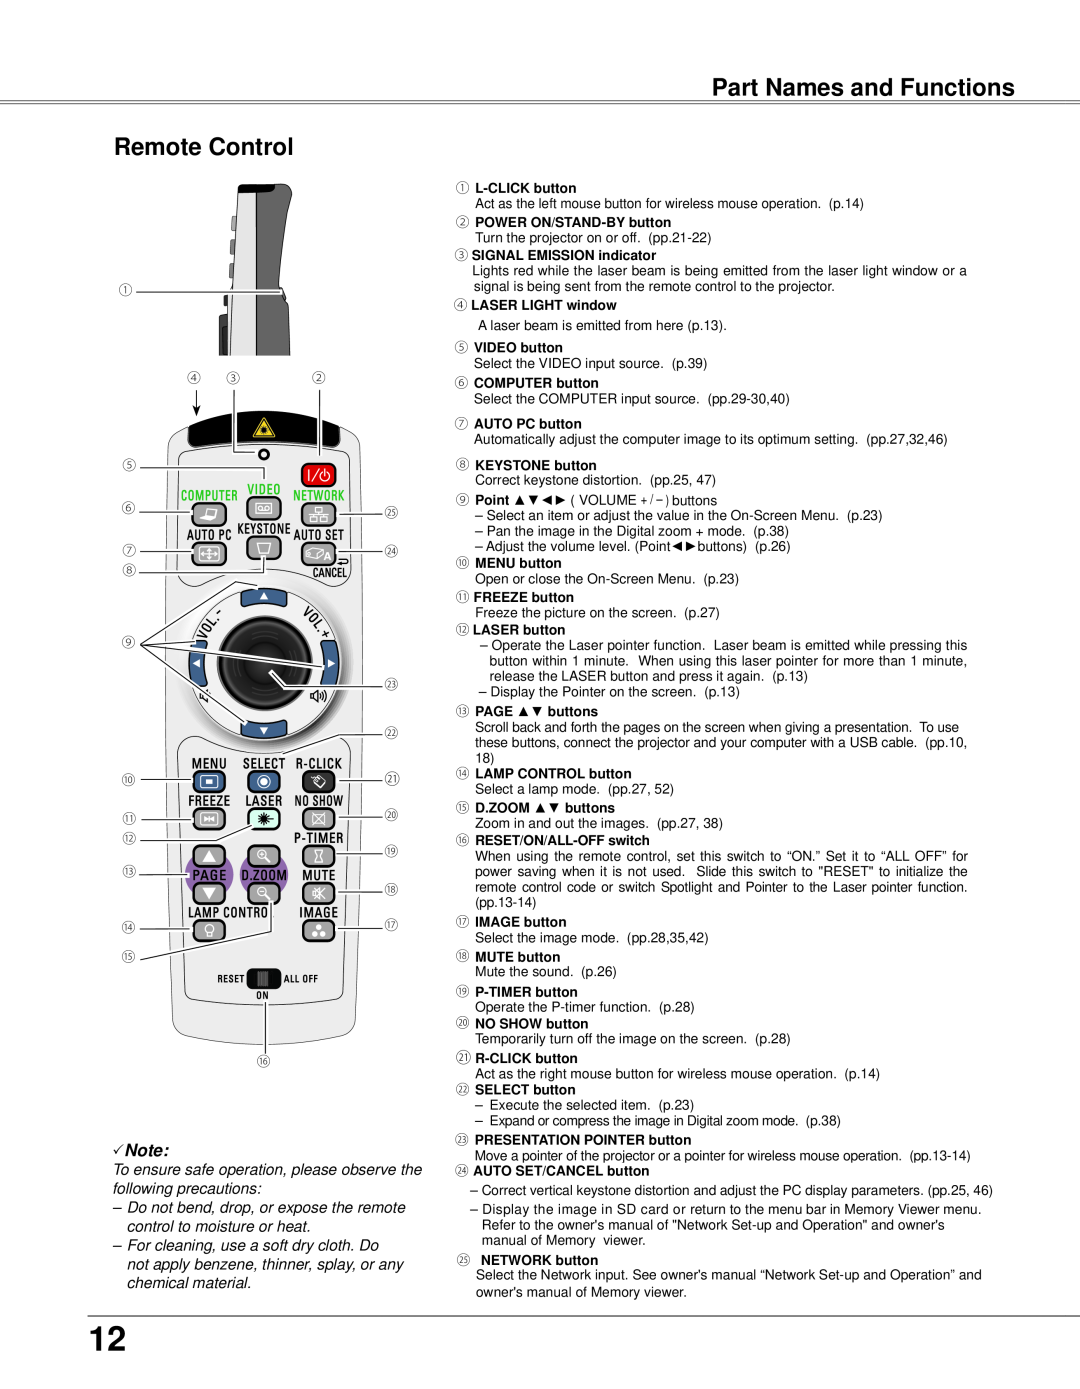 Eiki LC-XB33N owner manual Remote Control, Part Names and Functions, Note 